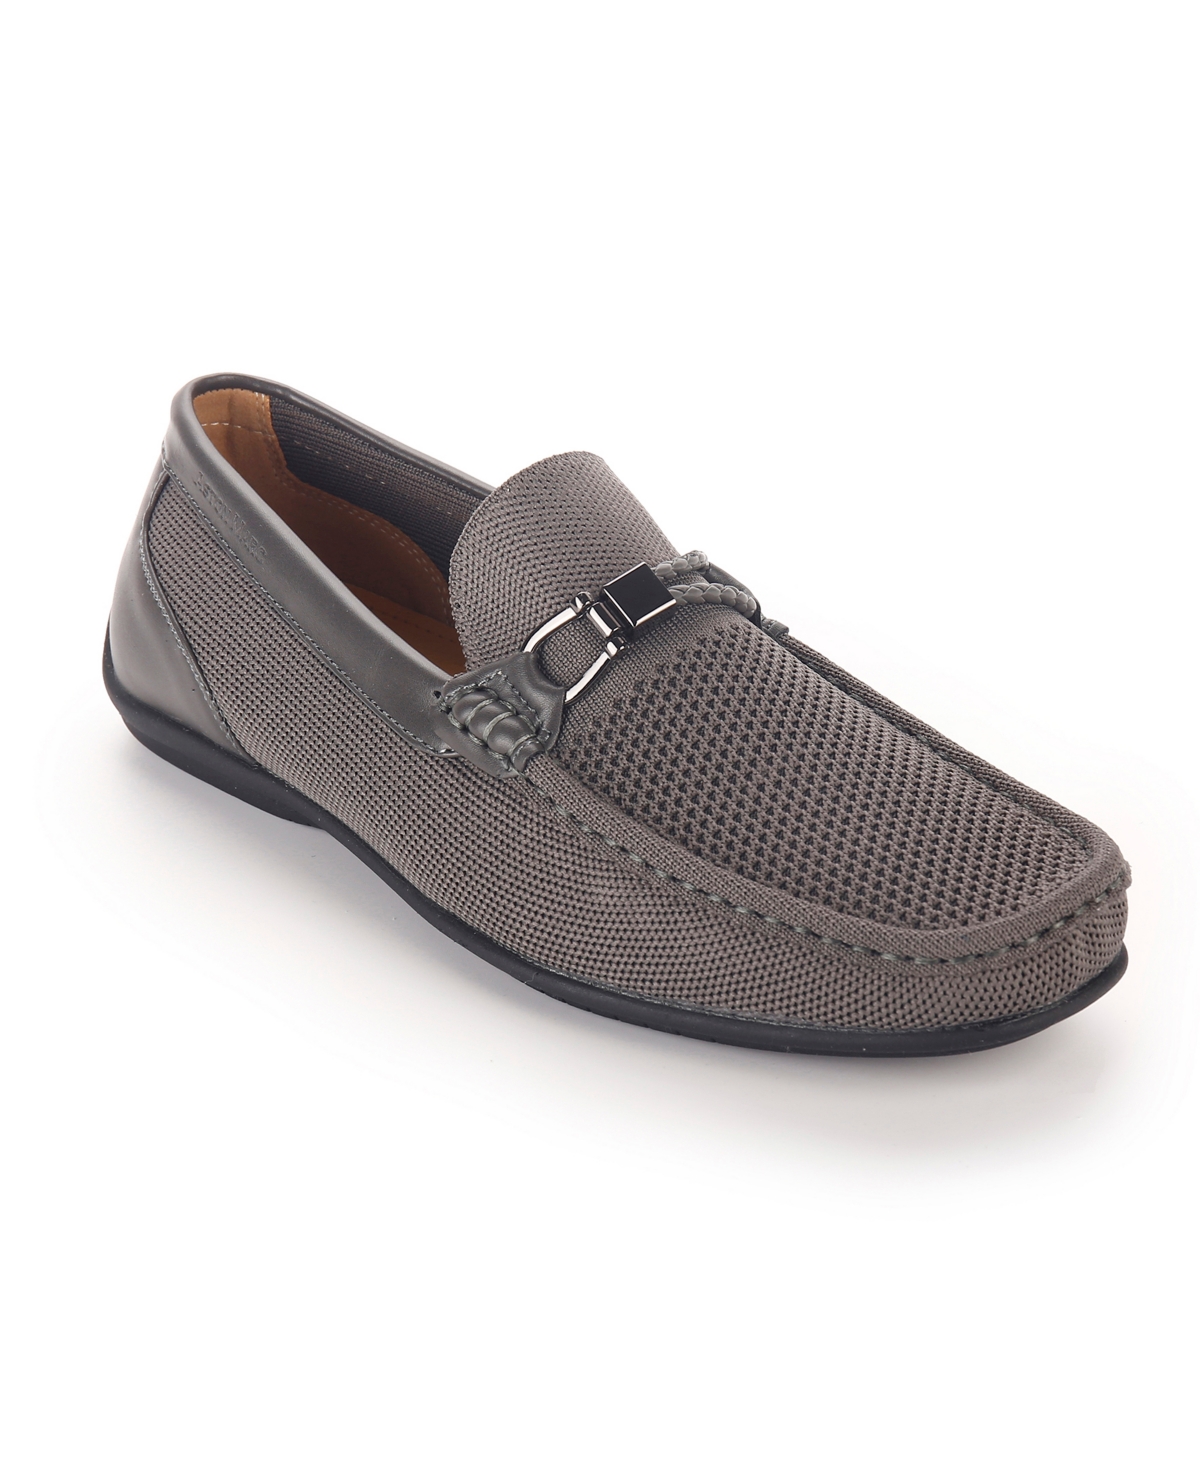 Men's Knit Driving Shoe Loafers - Navy